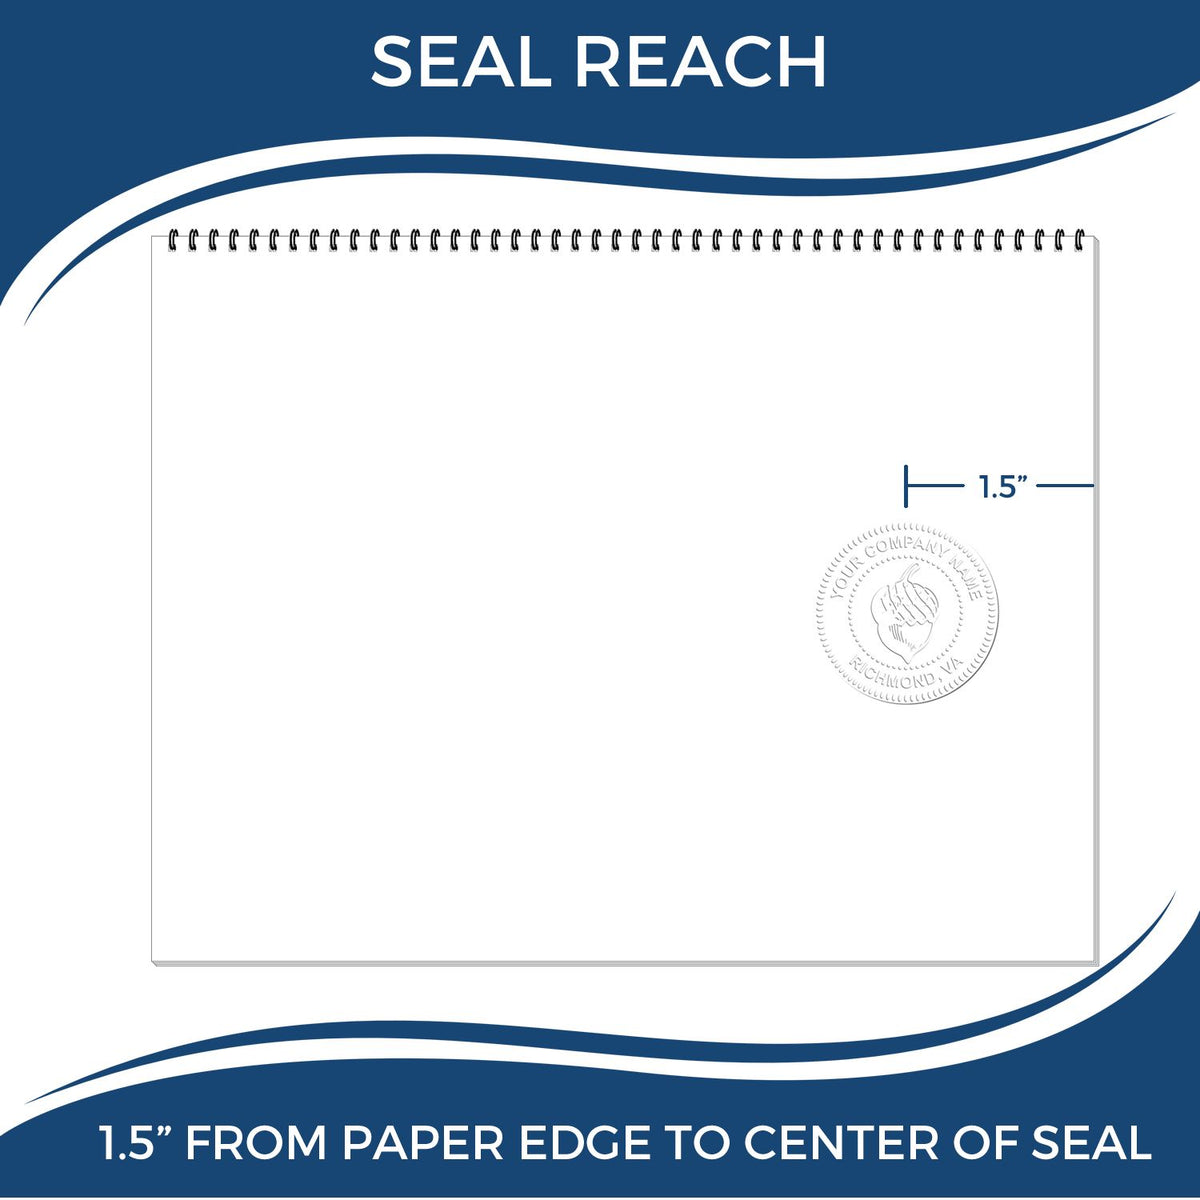 An infographic showing the seal reach which is represented by a ruler and a miniature seal image of the Handheld Louisiana Architect Seal Embosser